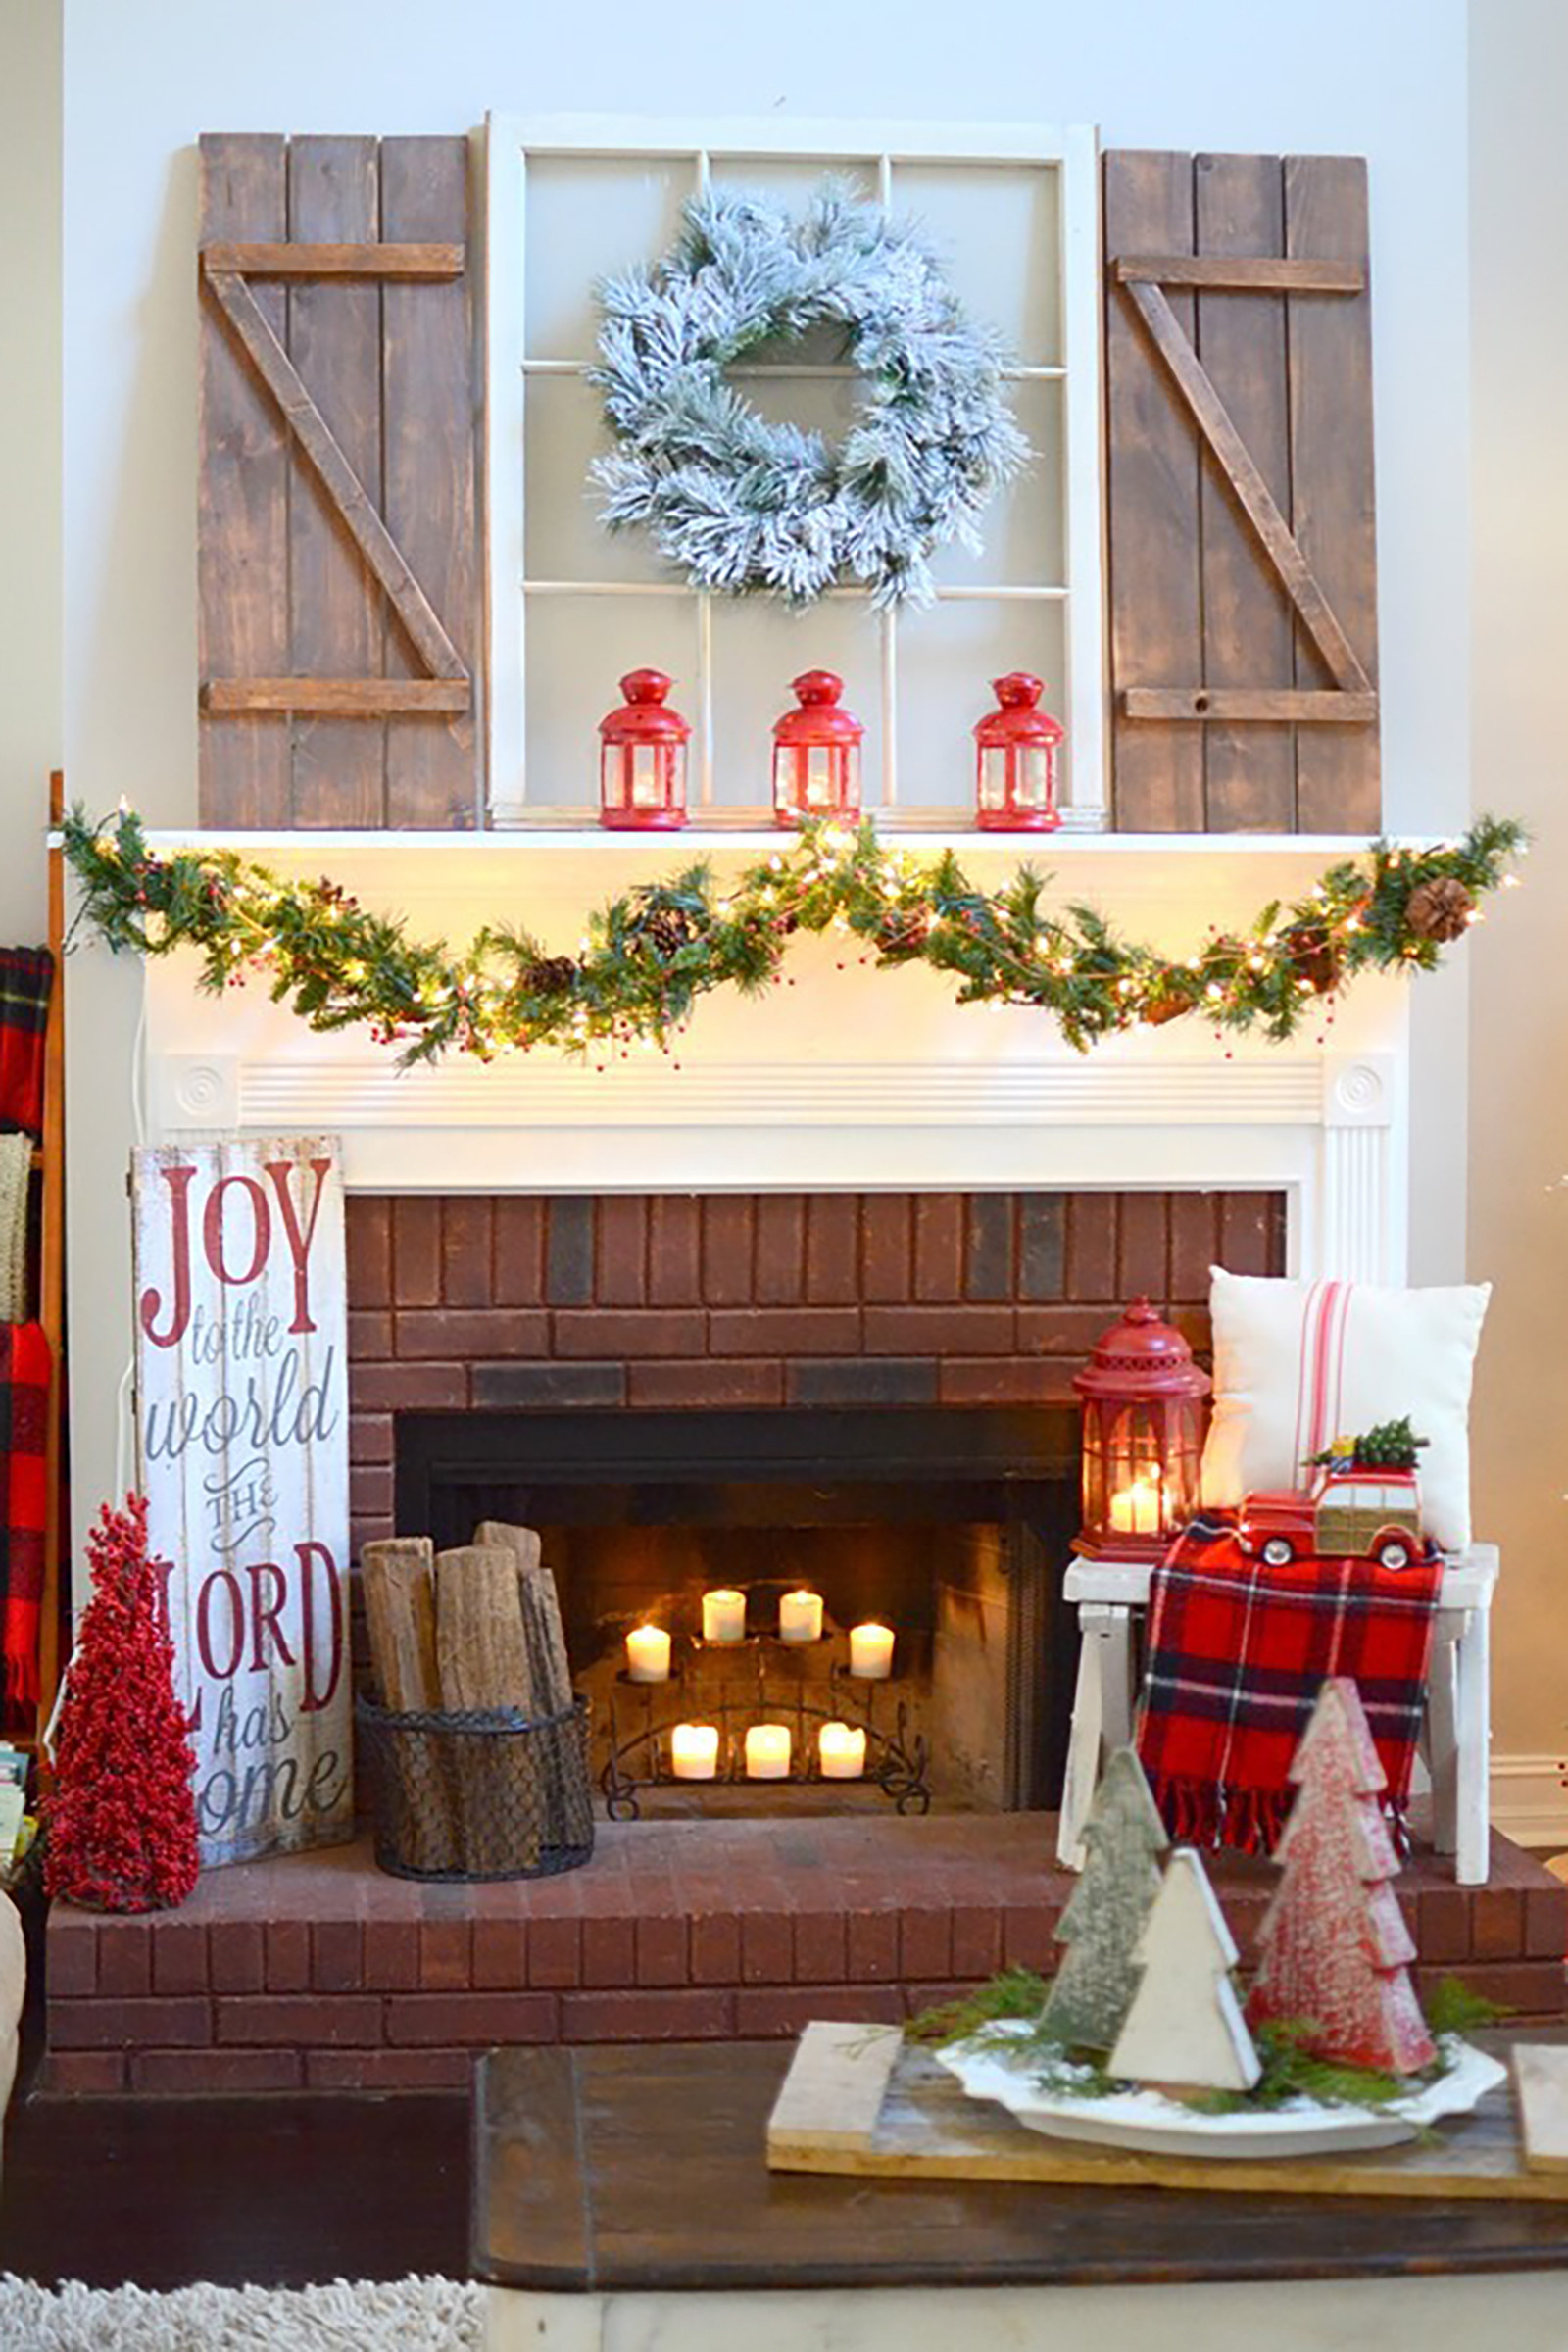 Decorate The Fireplace For Christmas
 35 Christmas Mantel Decorations Ideas for Holiday